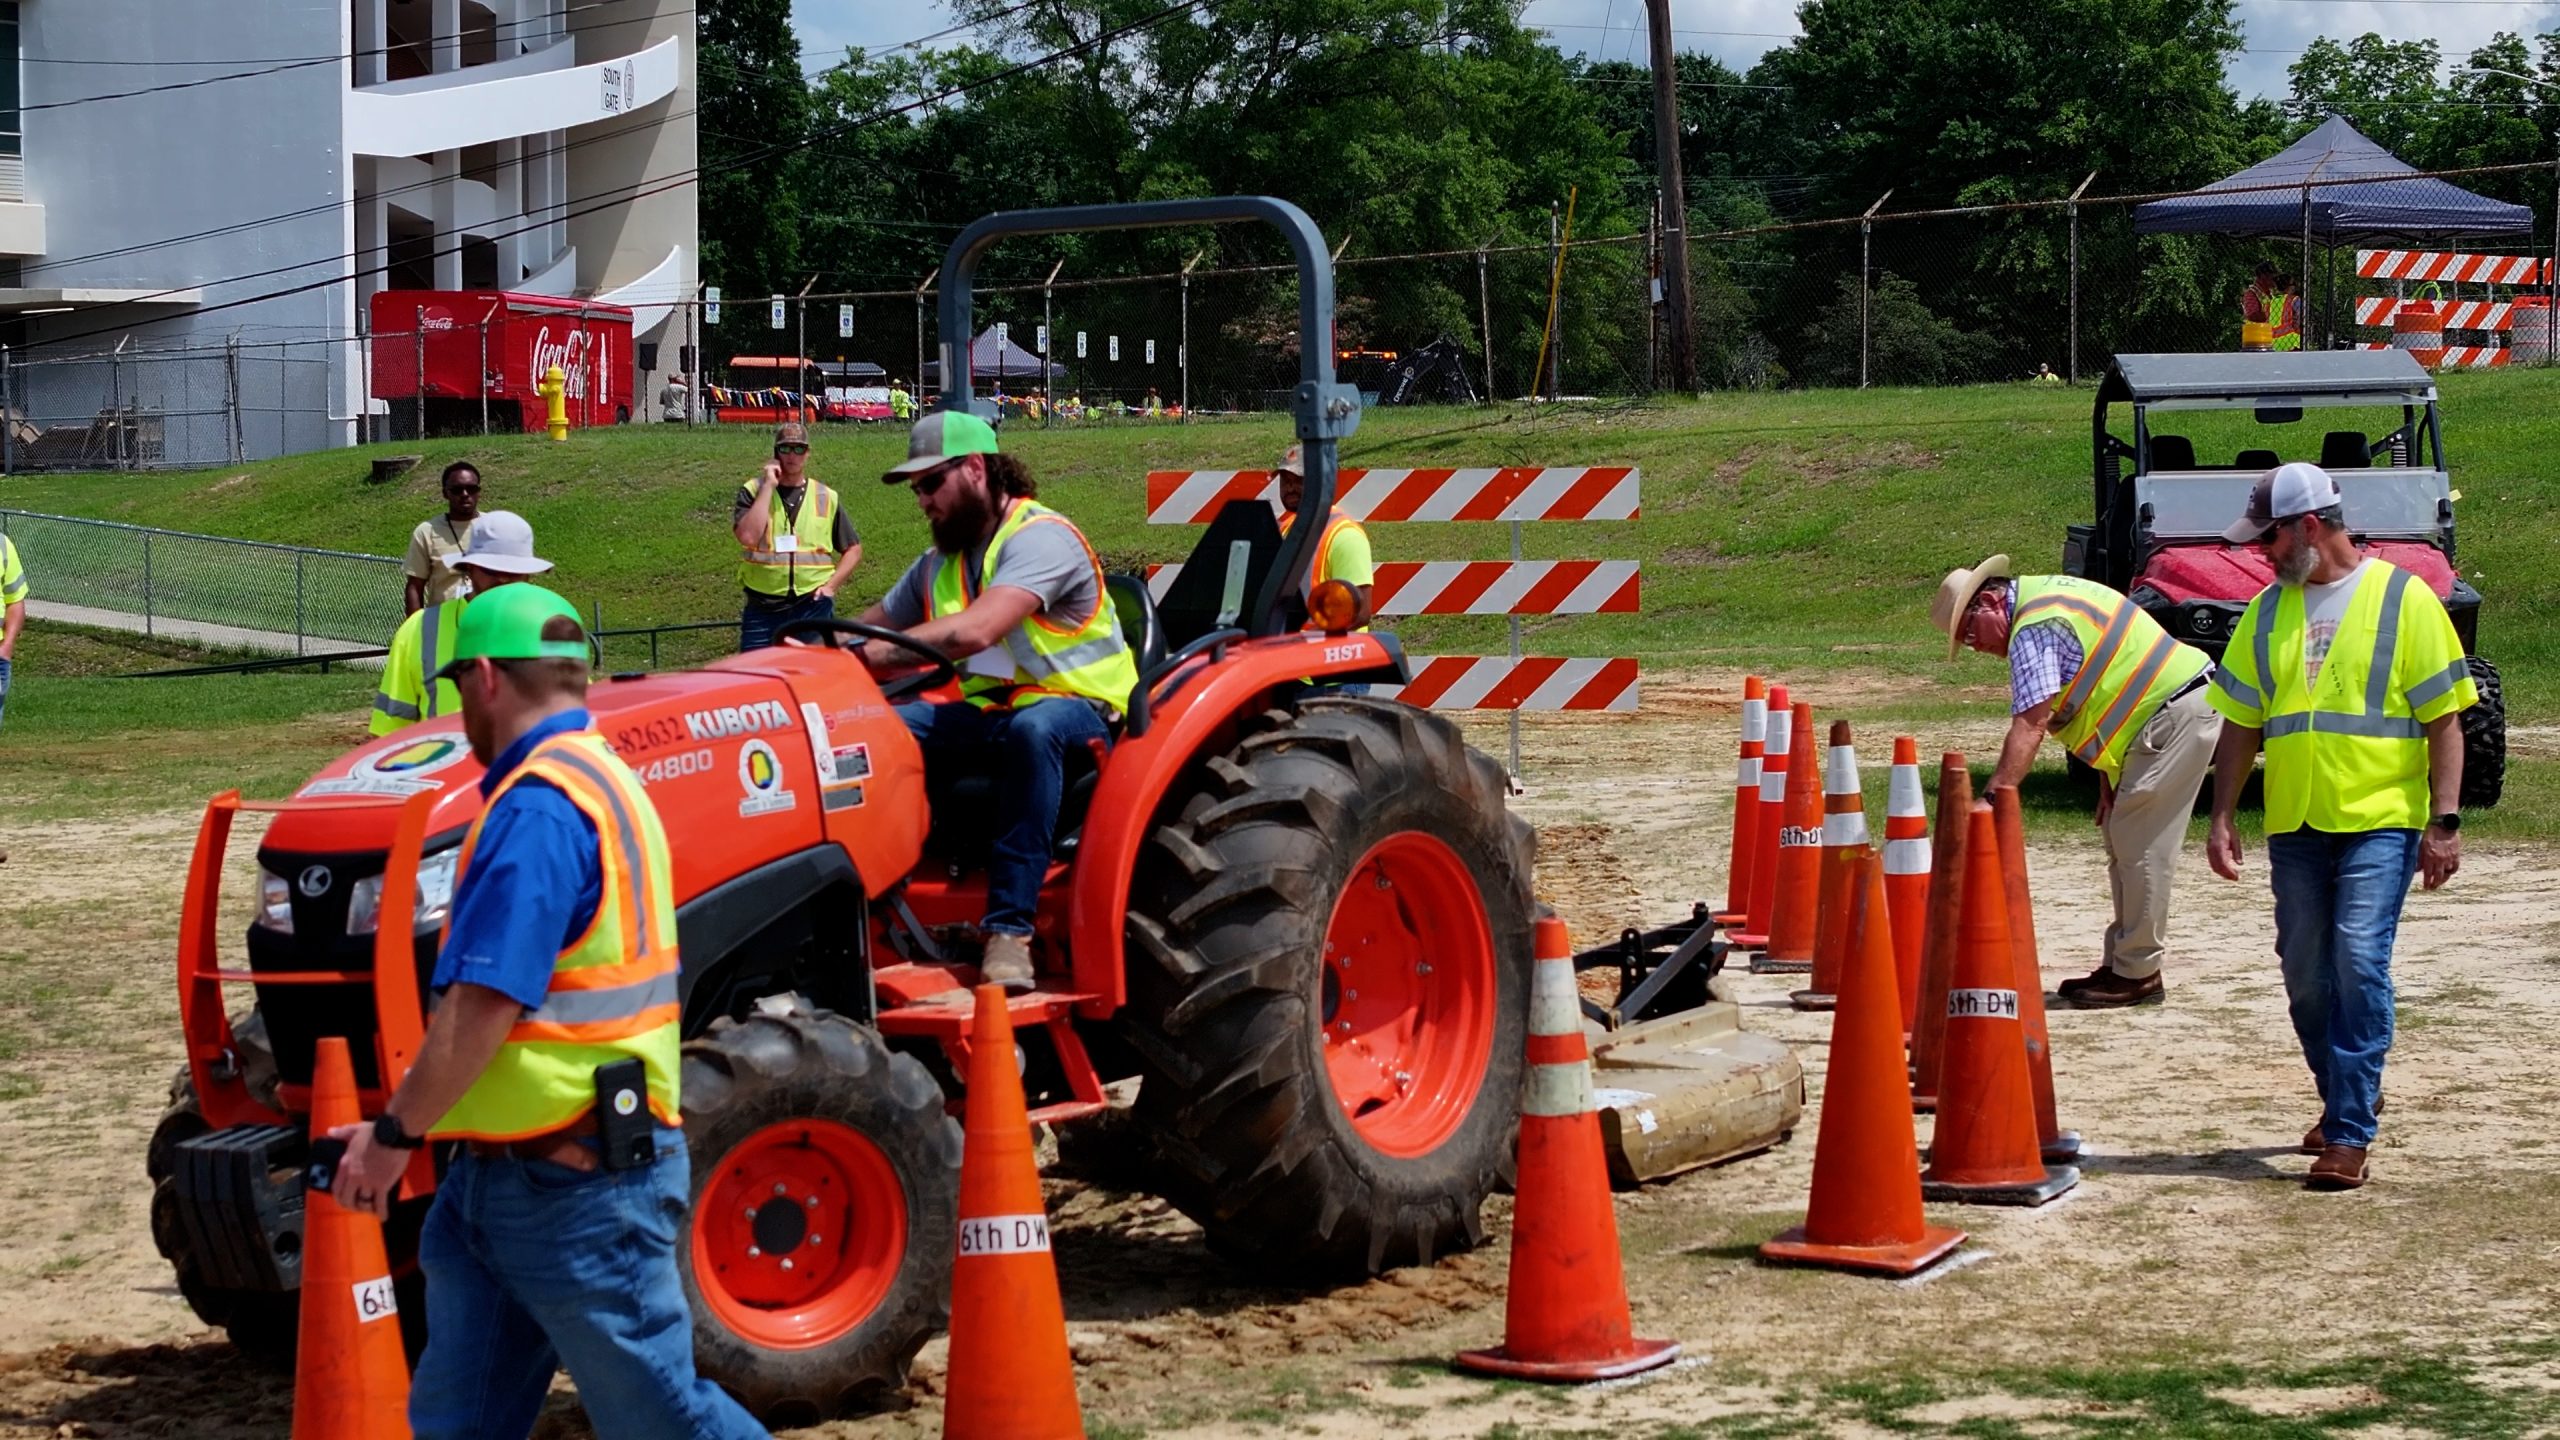 Man driving a tractor through an obstacle course made of cones